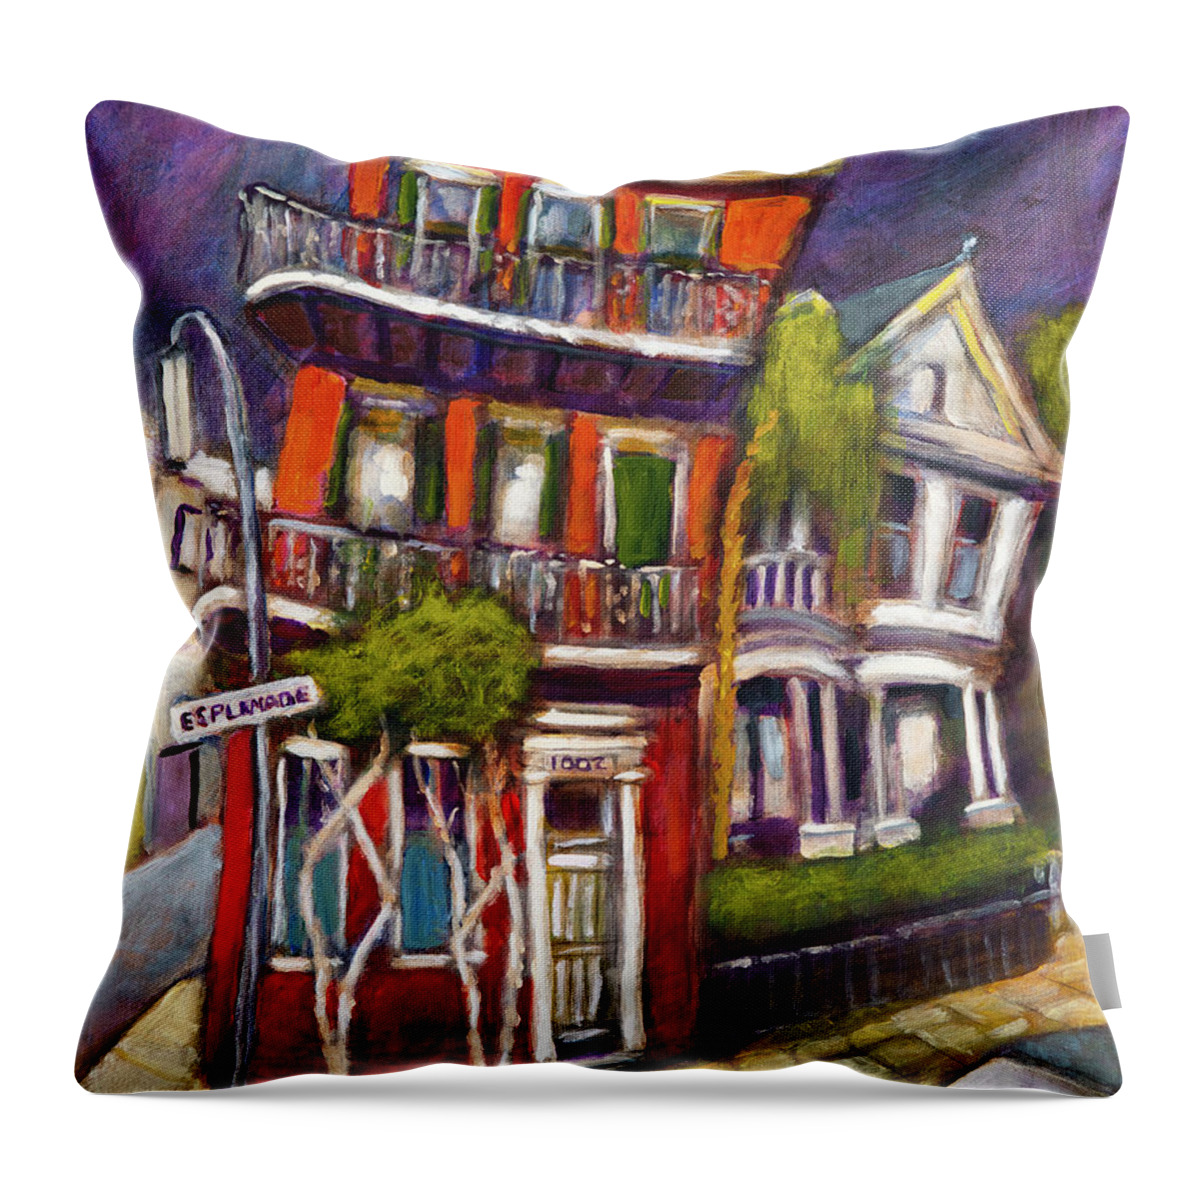 Building Throw Pillow featuring the painting Esplanade by Mike Bergen